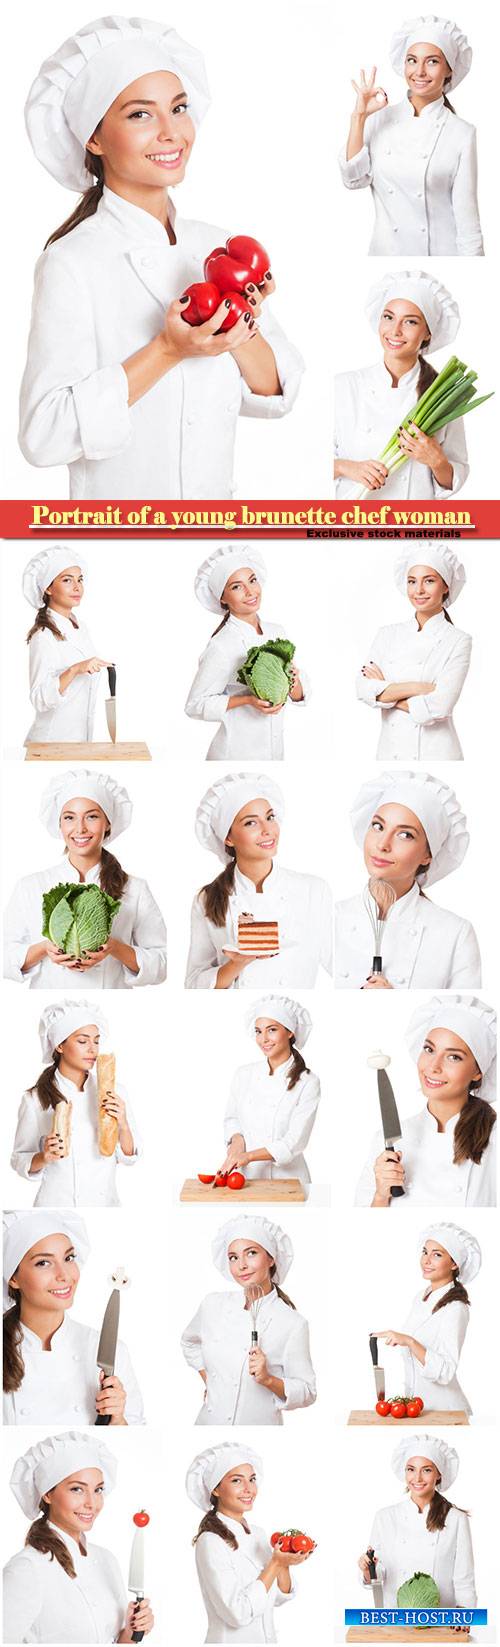 Portrait of a young brunette chef woman isolated on white background